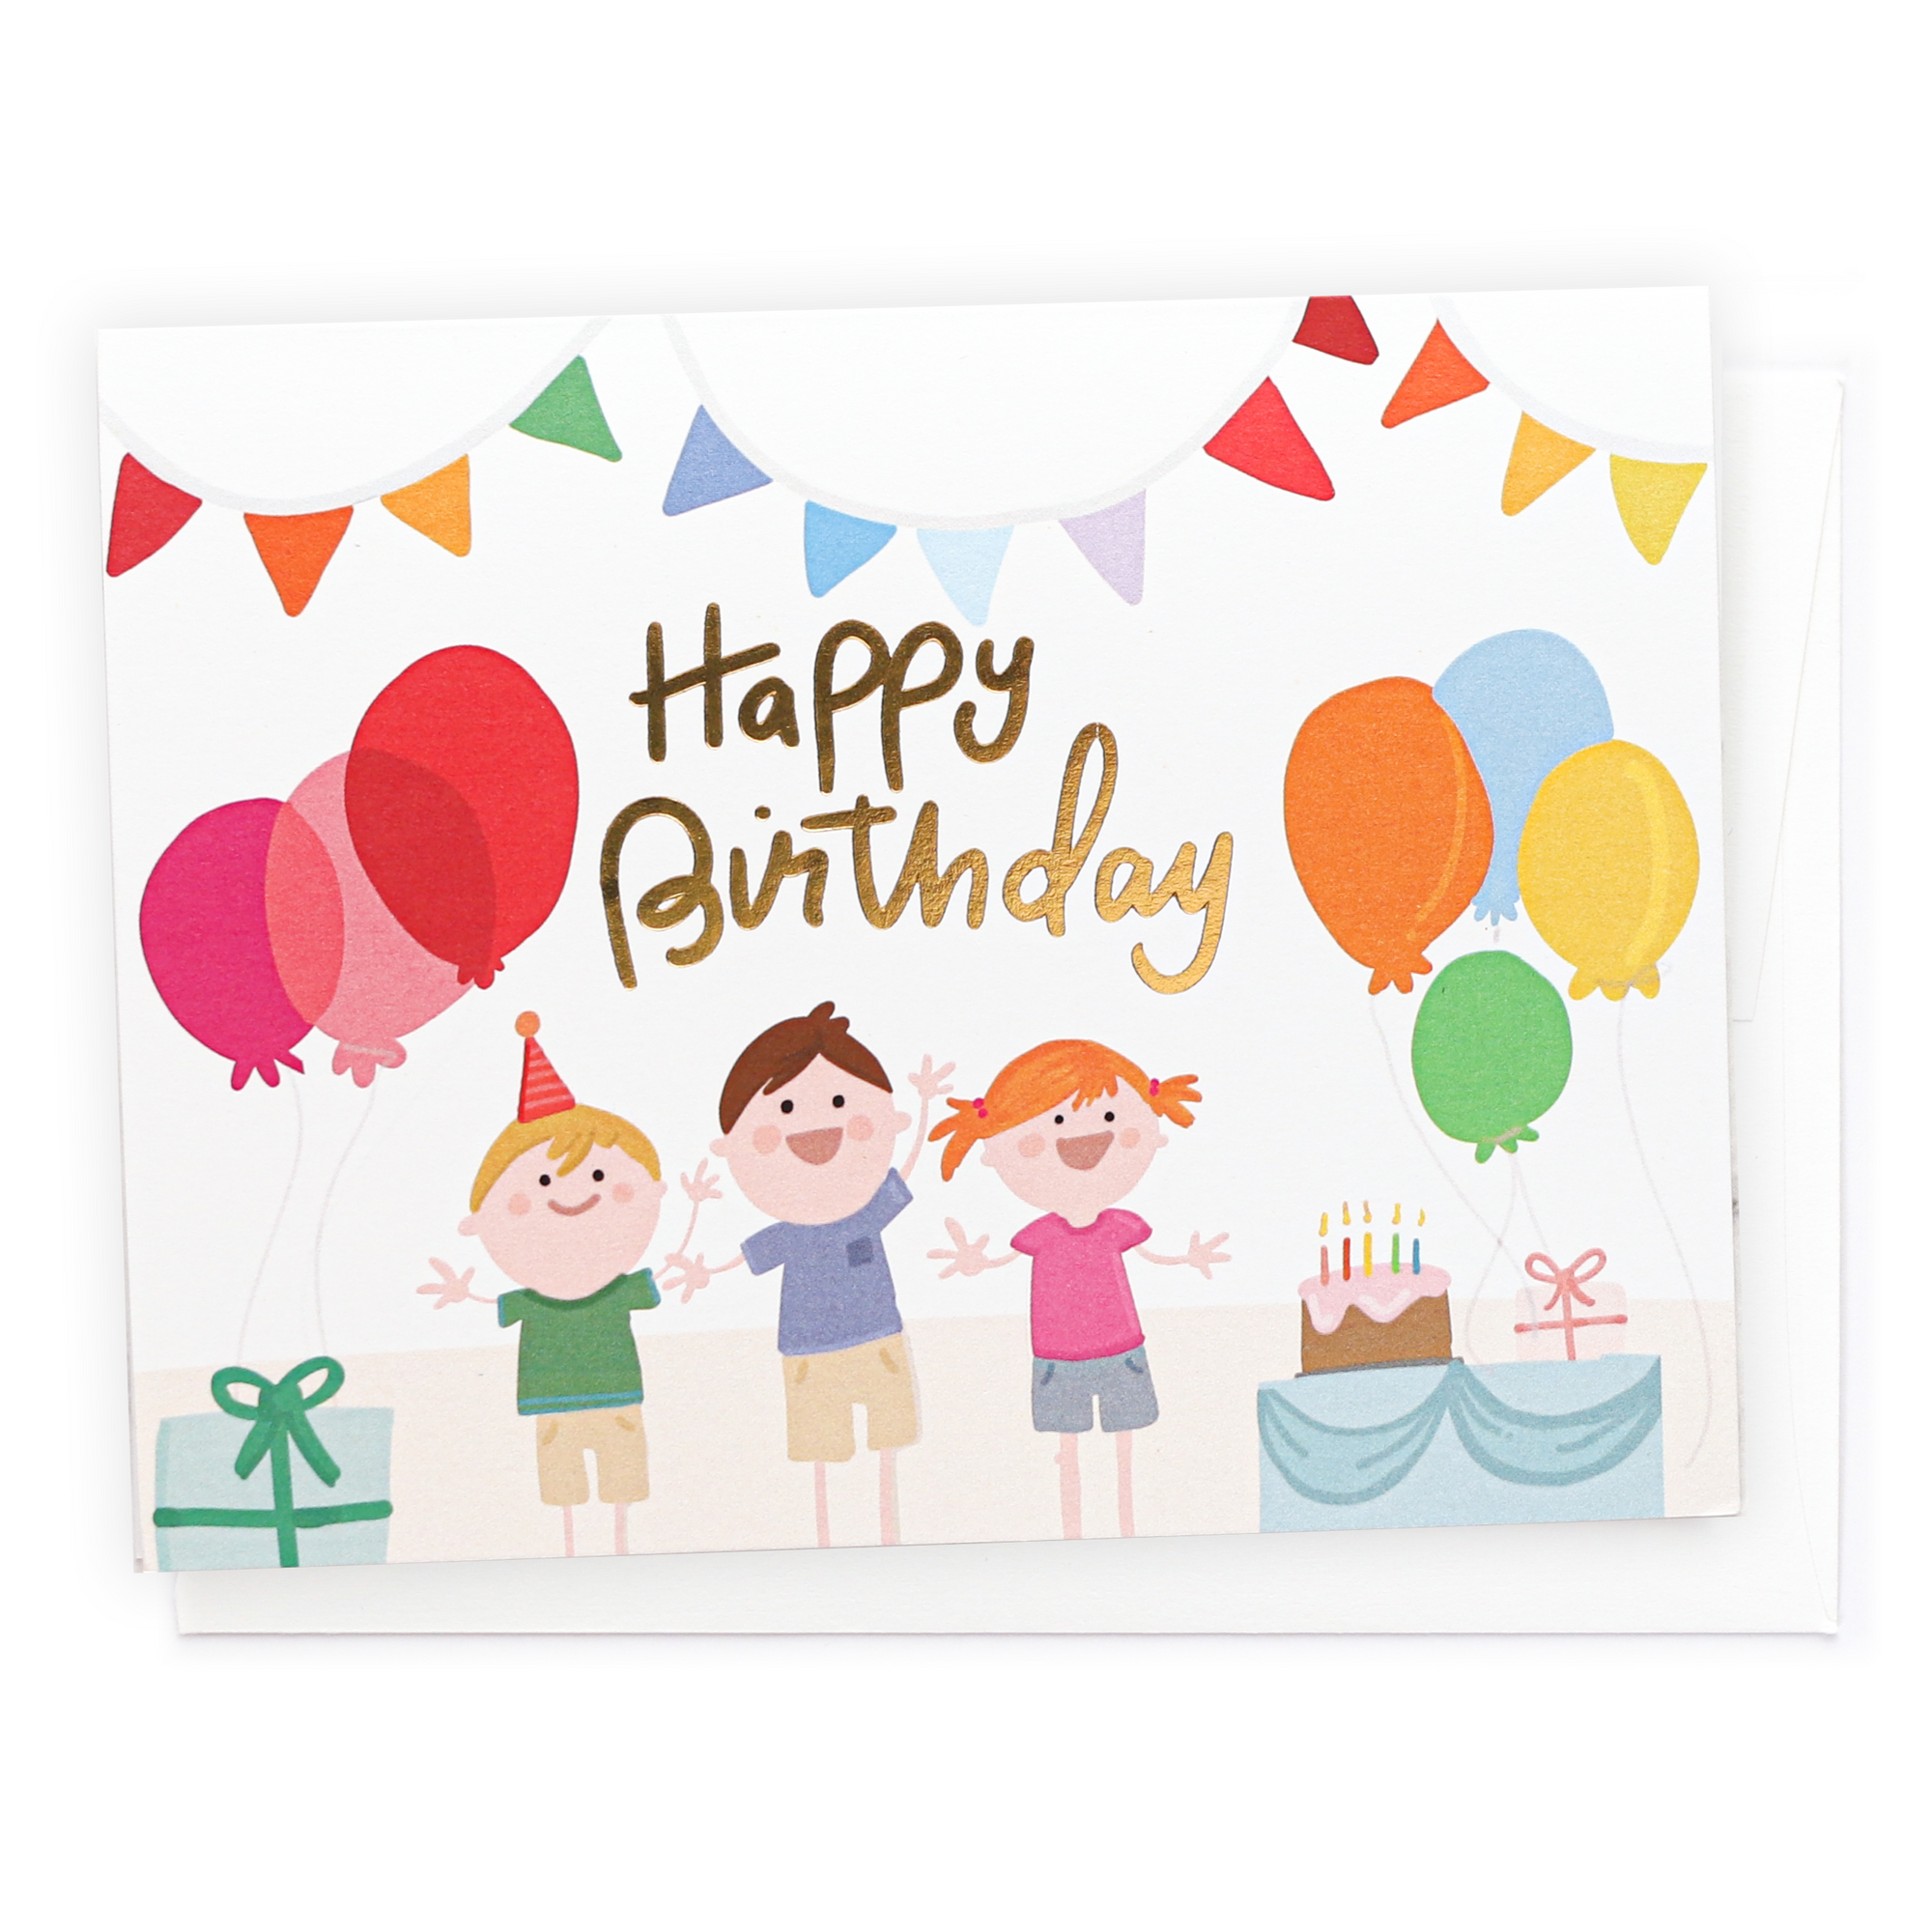 Kids Birthday Party, Greeting Card